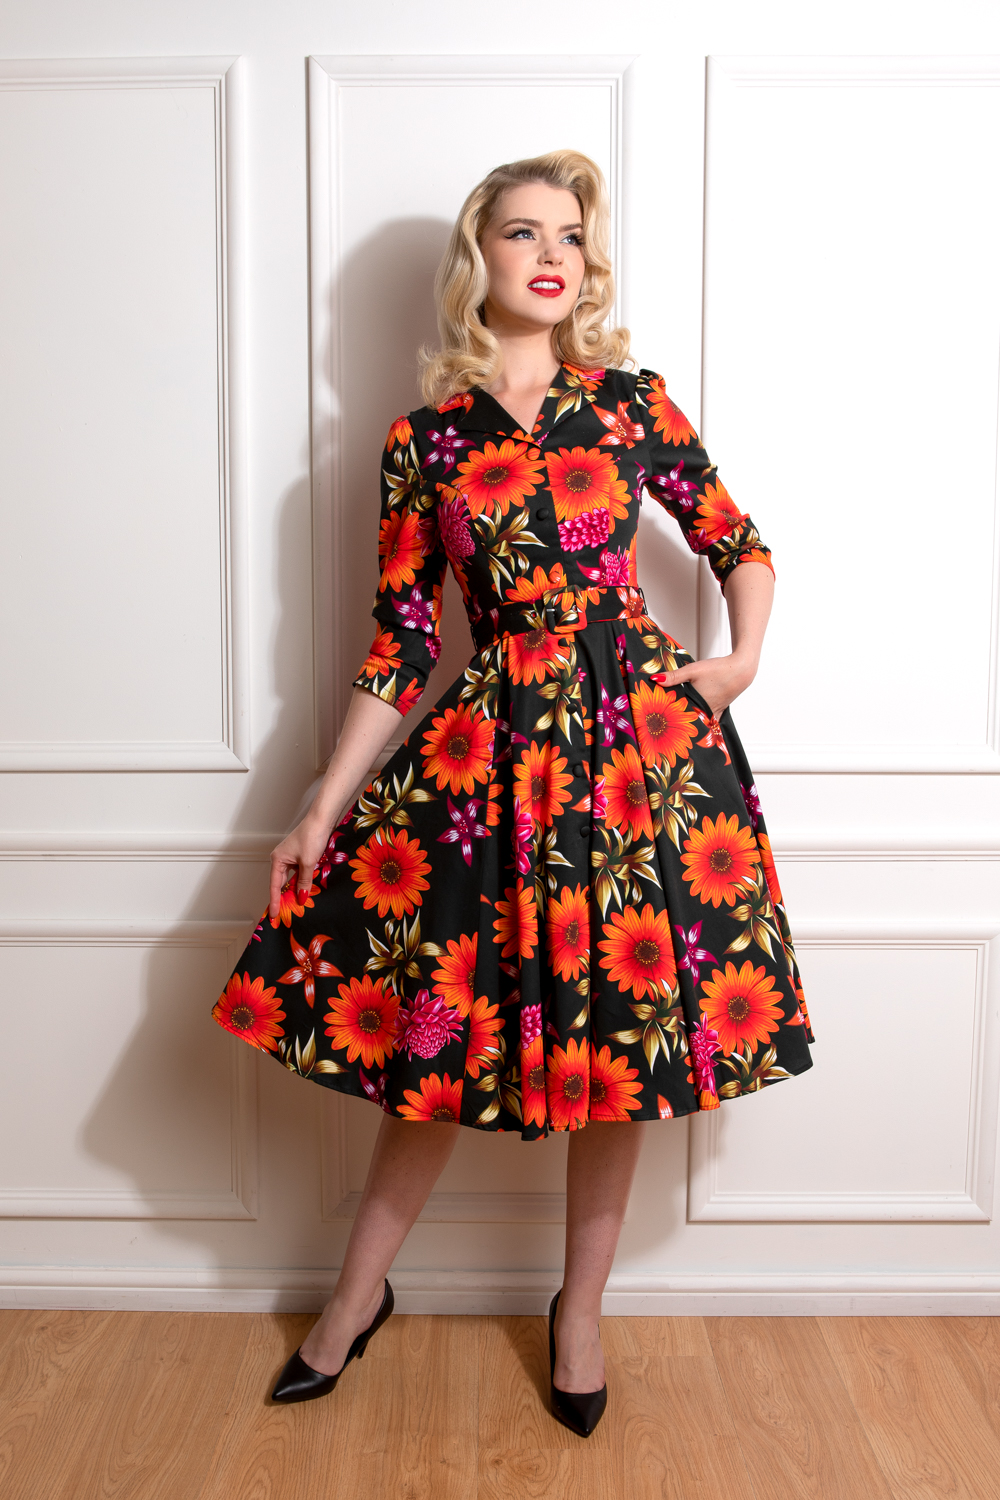 New Arrivals - Hearts & Roses London